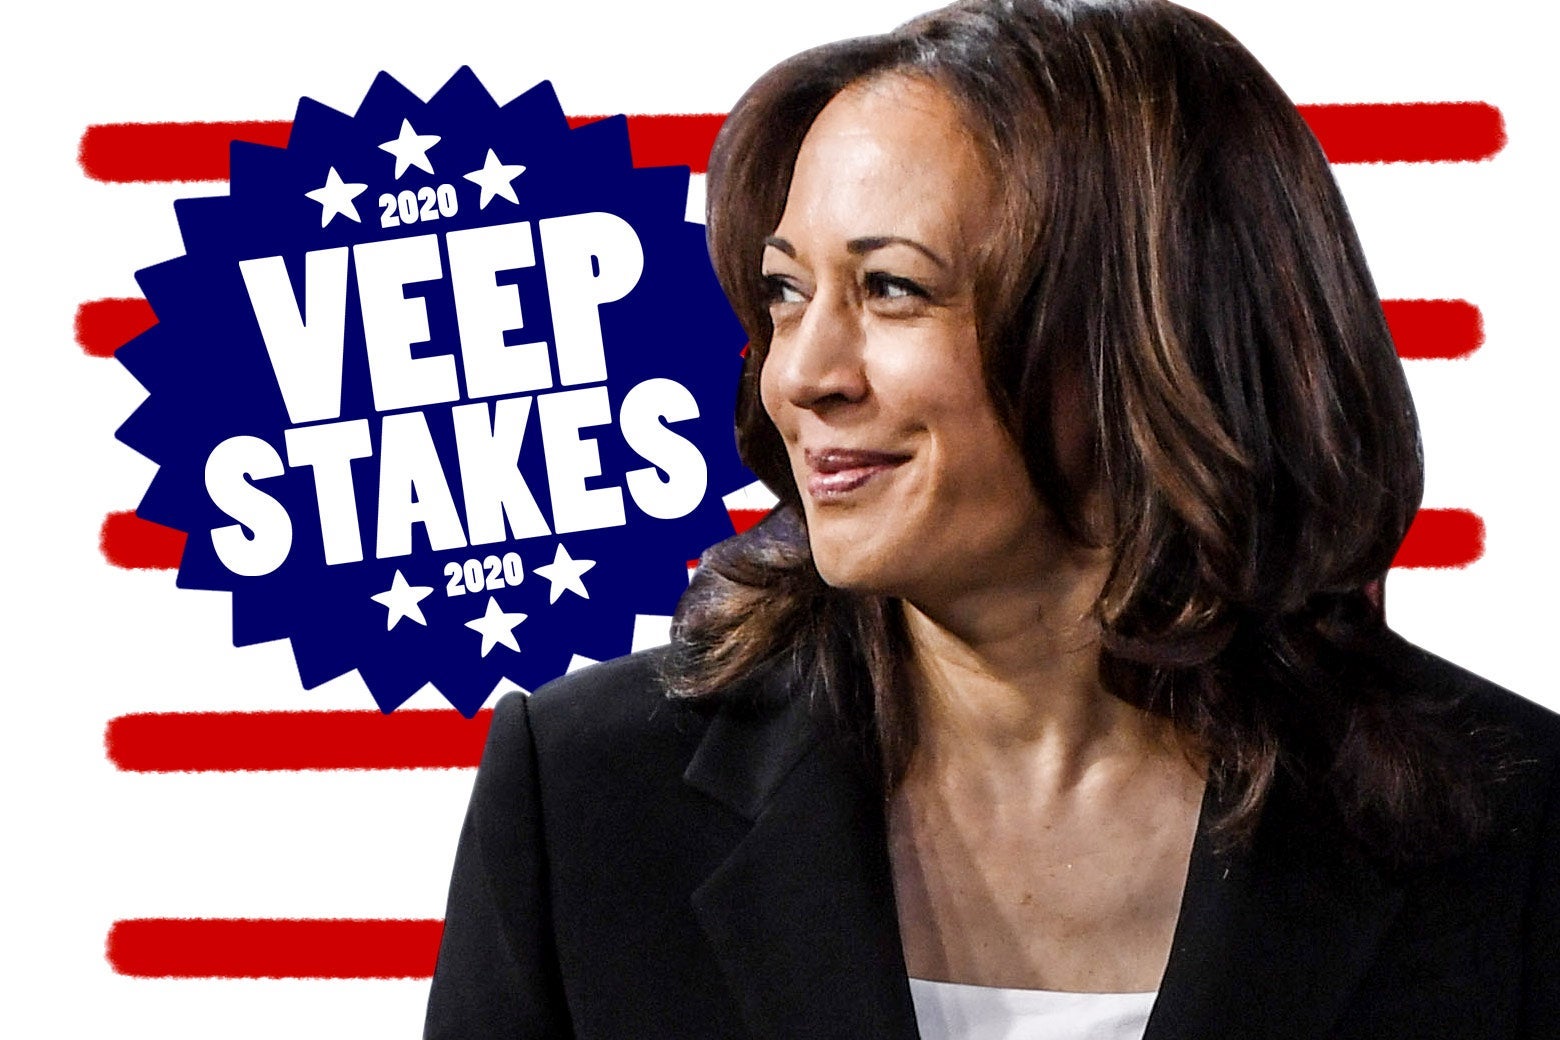 Kamala Harris, on a background with a badge that says "2020 Veepstakes."